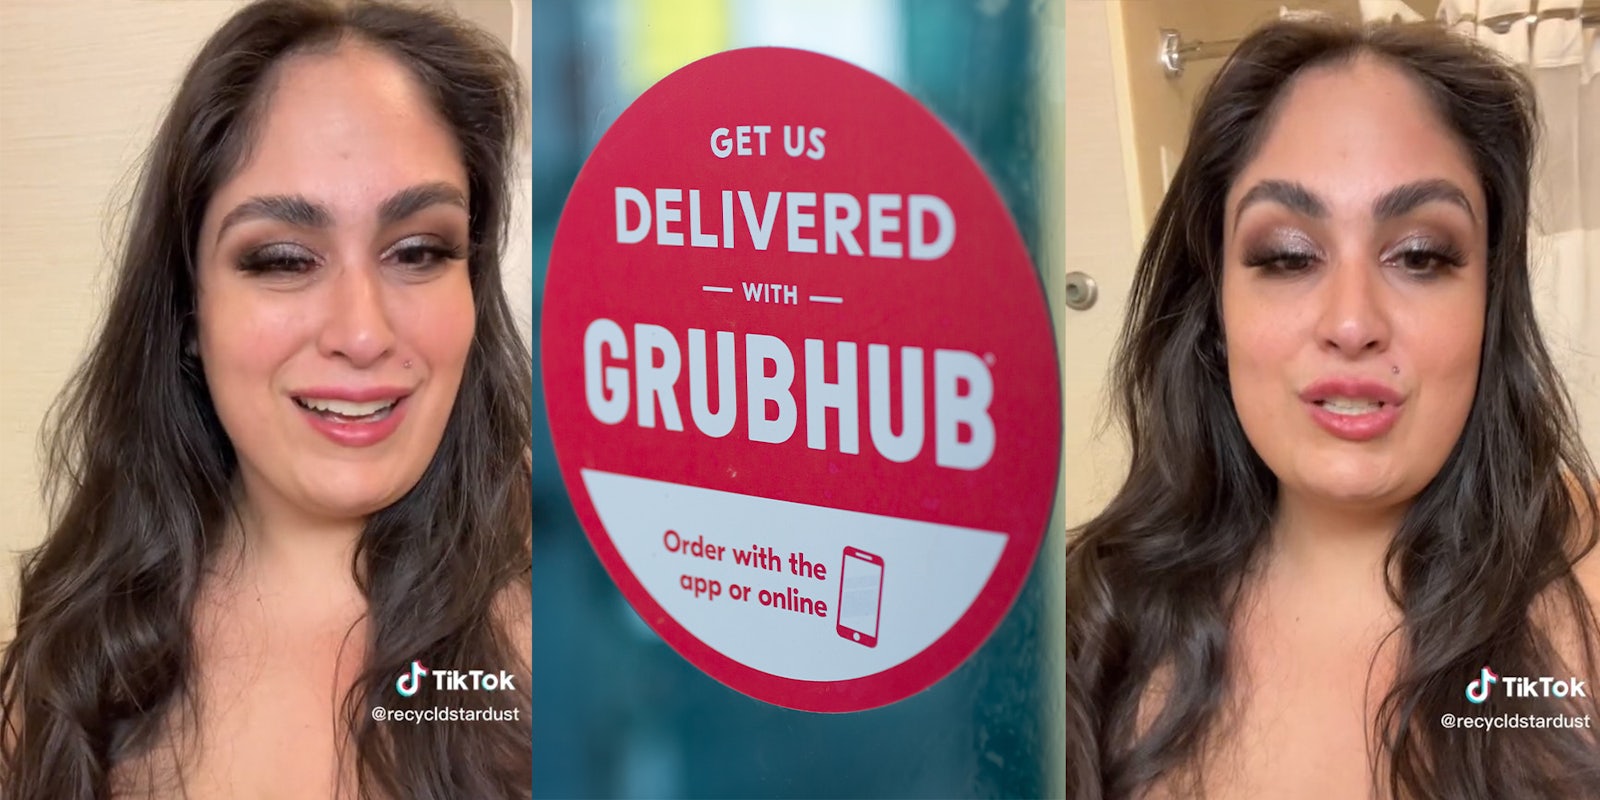 Woman says hotel she is staying at tried to steal her Grubhub McDonald's order